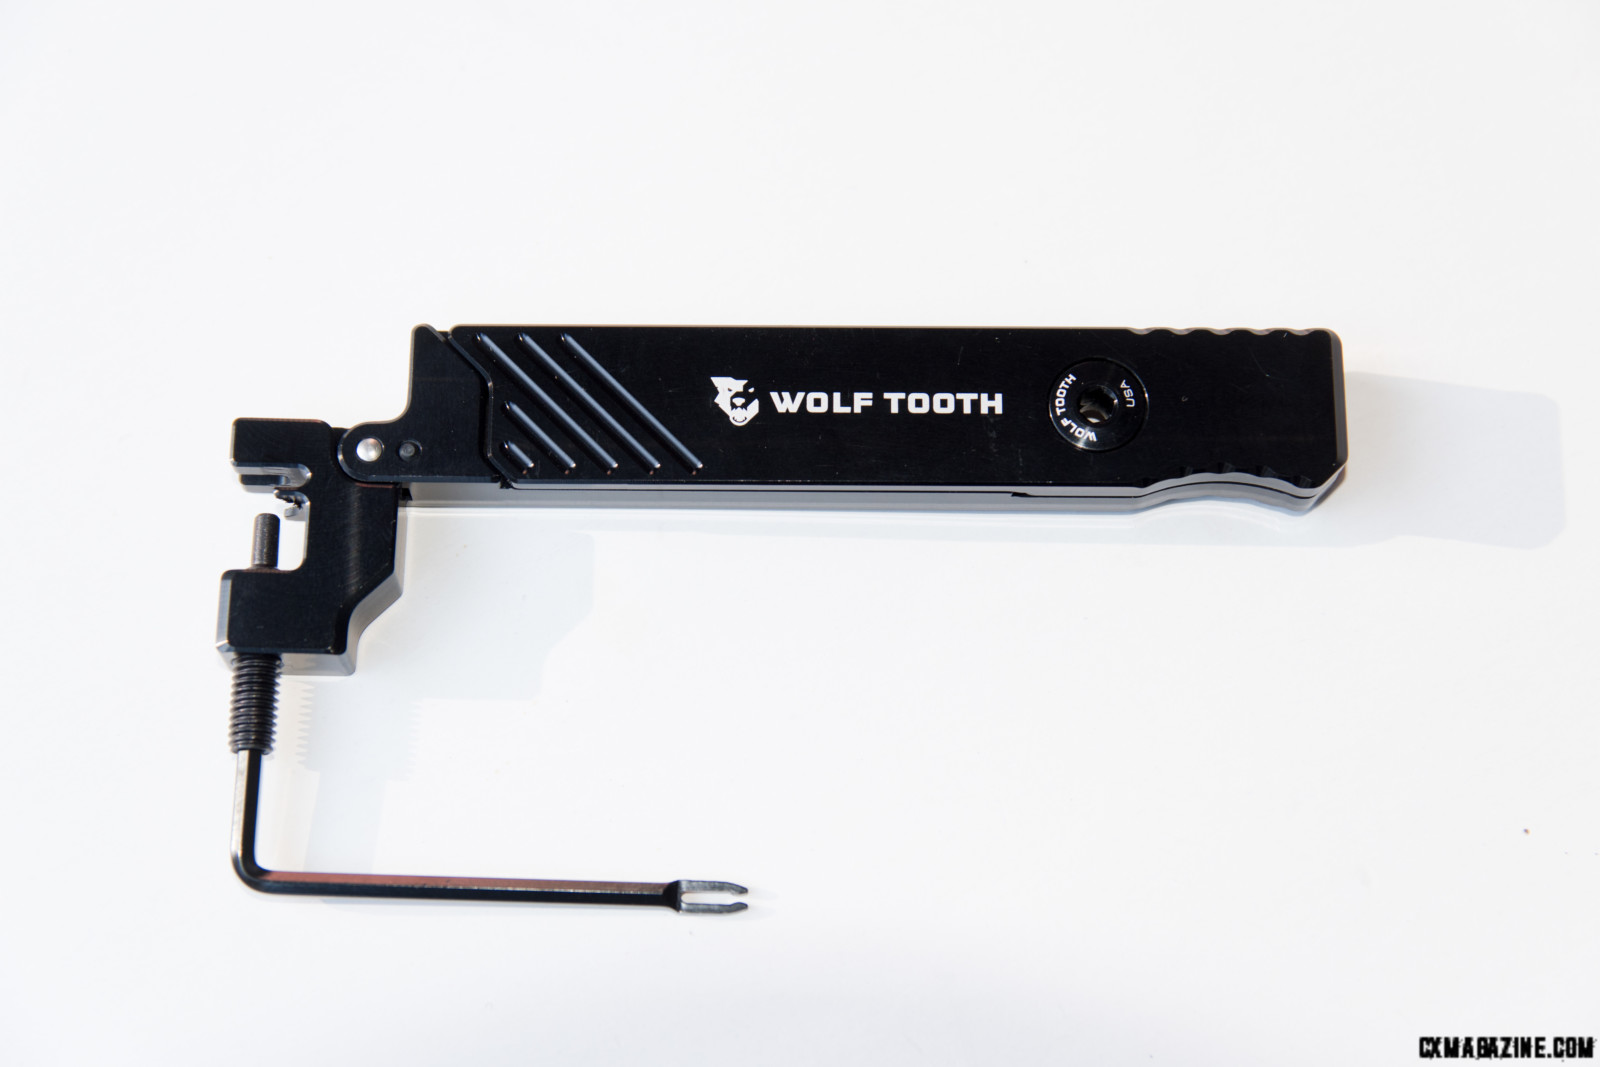 wolfTooth Components 8-Bit Chaintool and Utility Knife allen key has a plug insertion tool